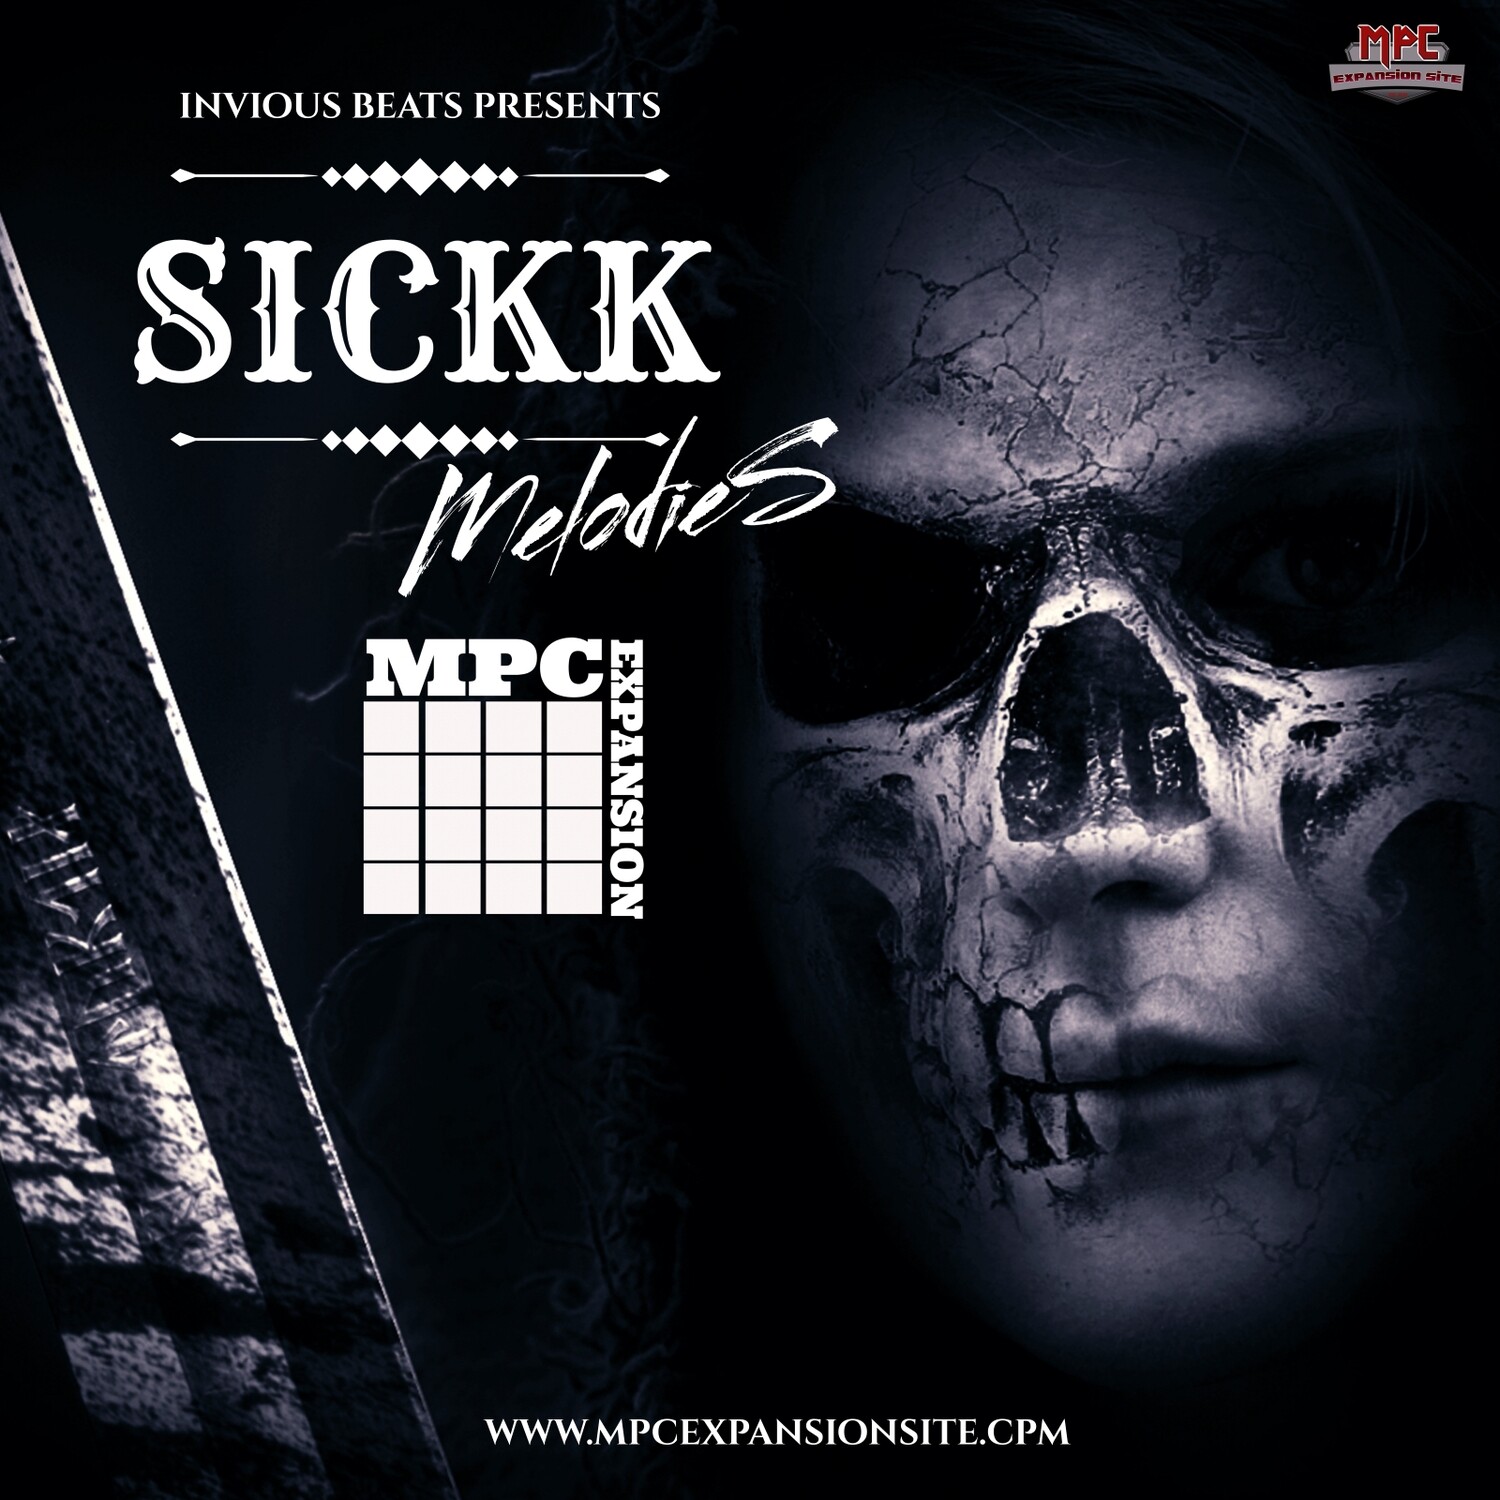 MPC EXPANSION 'SICKK MELODIES' by INVIOUS